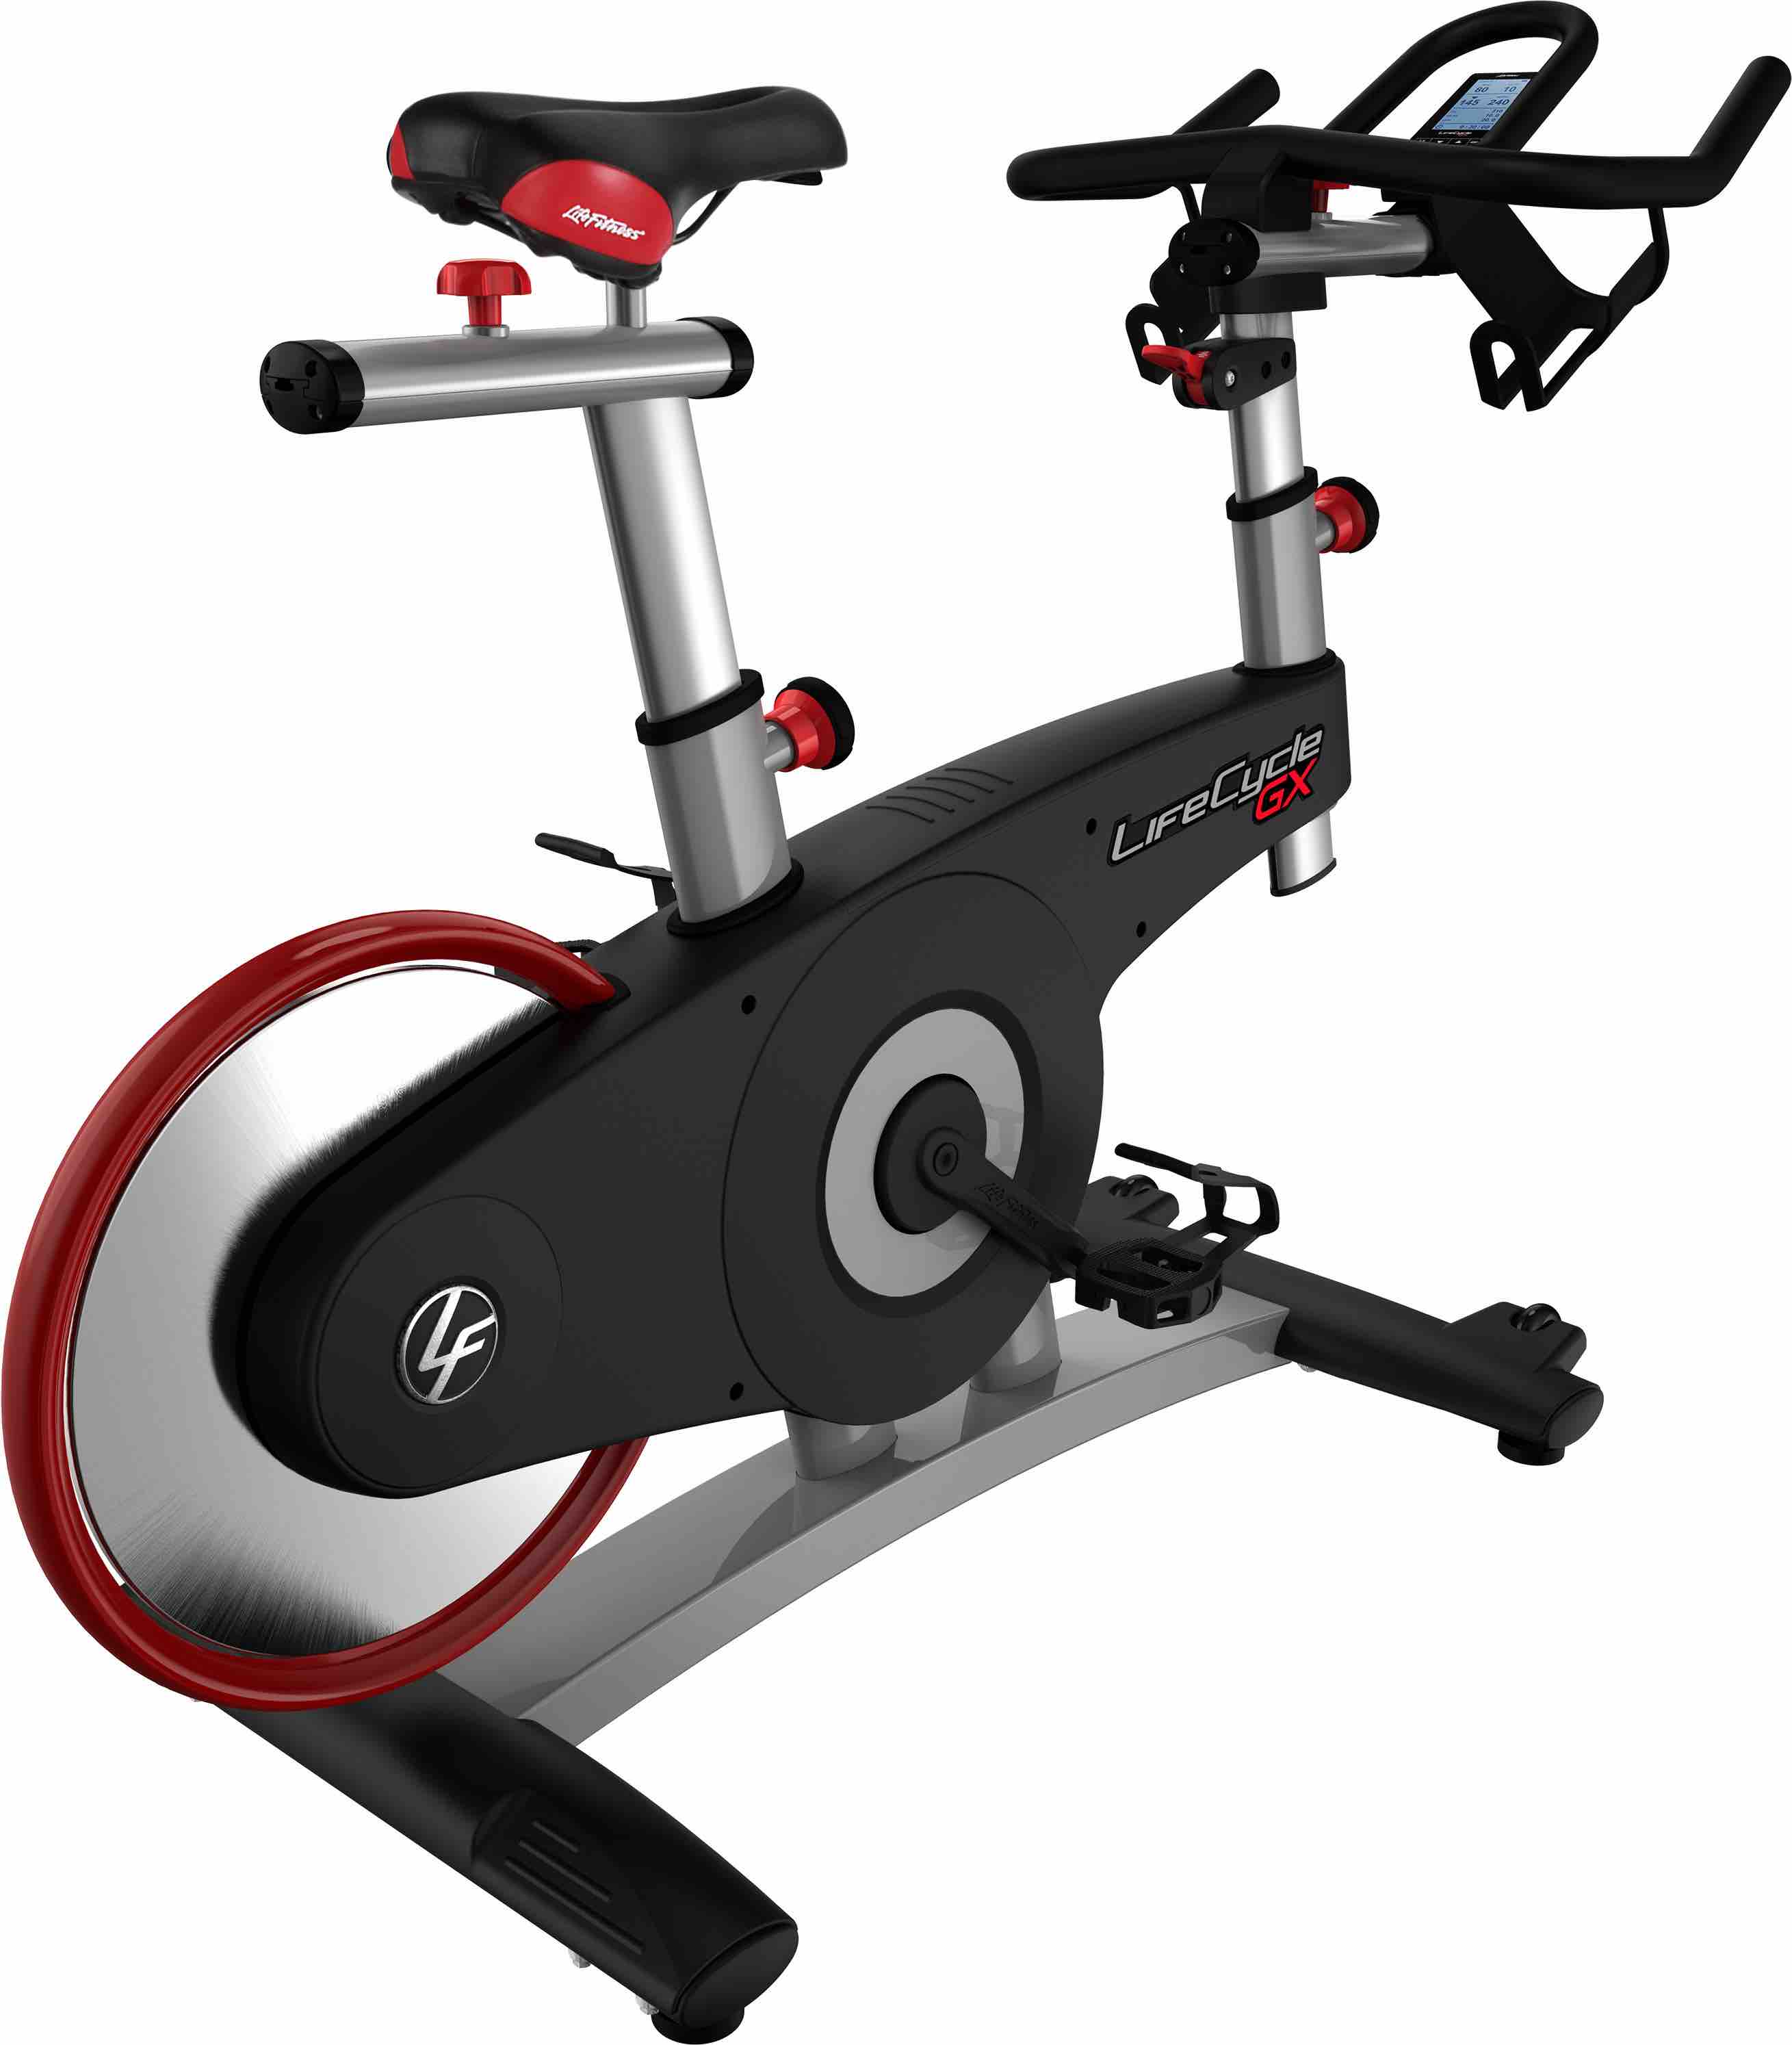 Life Fitness Lifecycle Gx Indoor Cycle